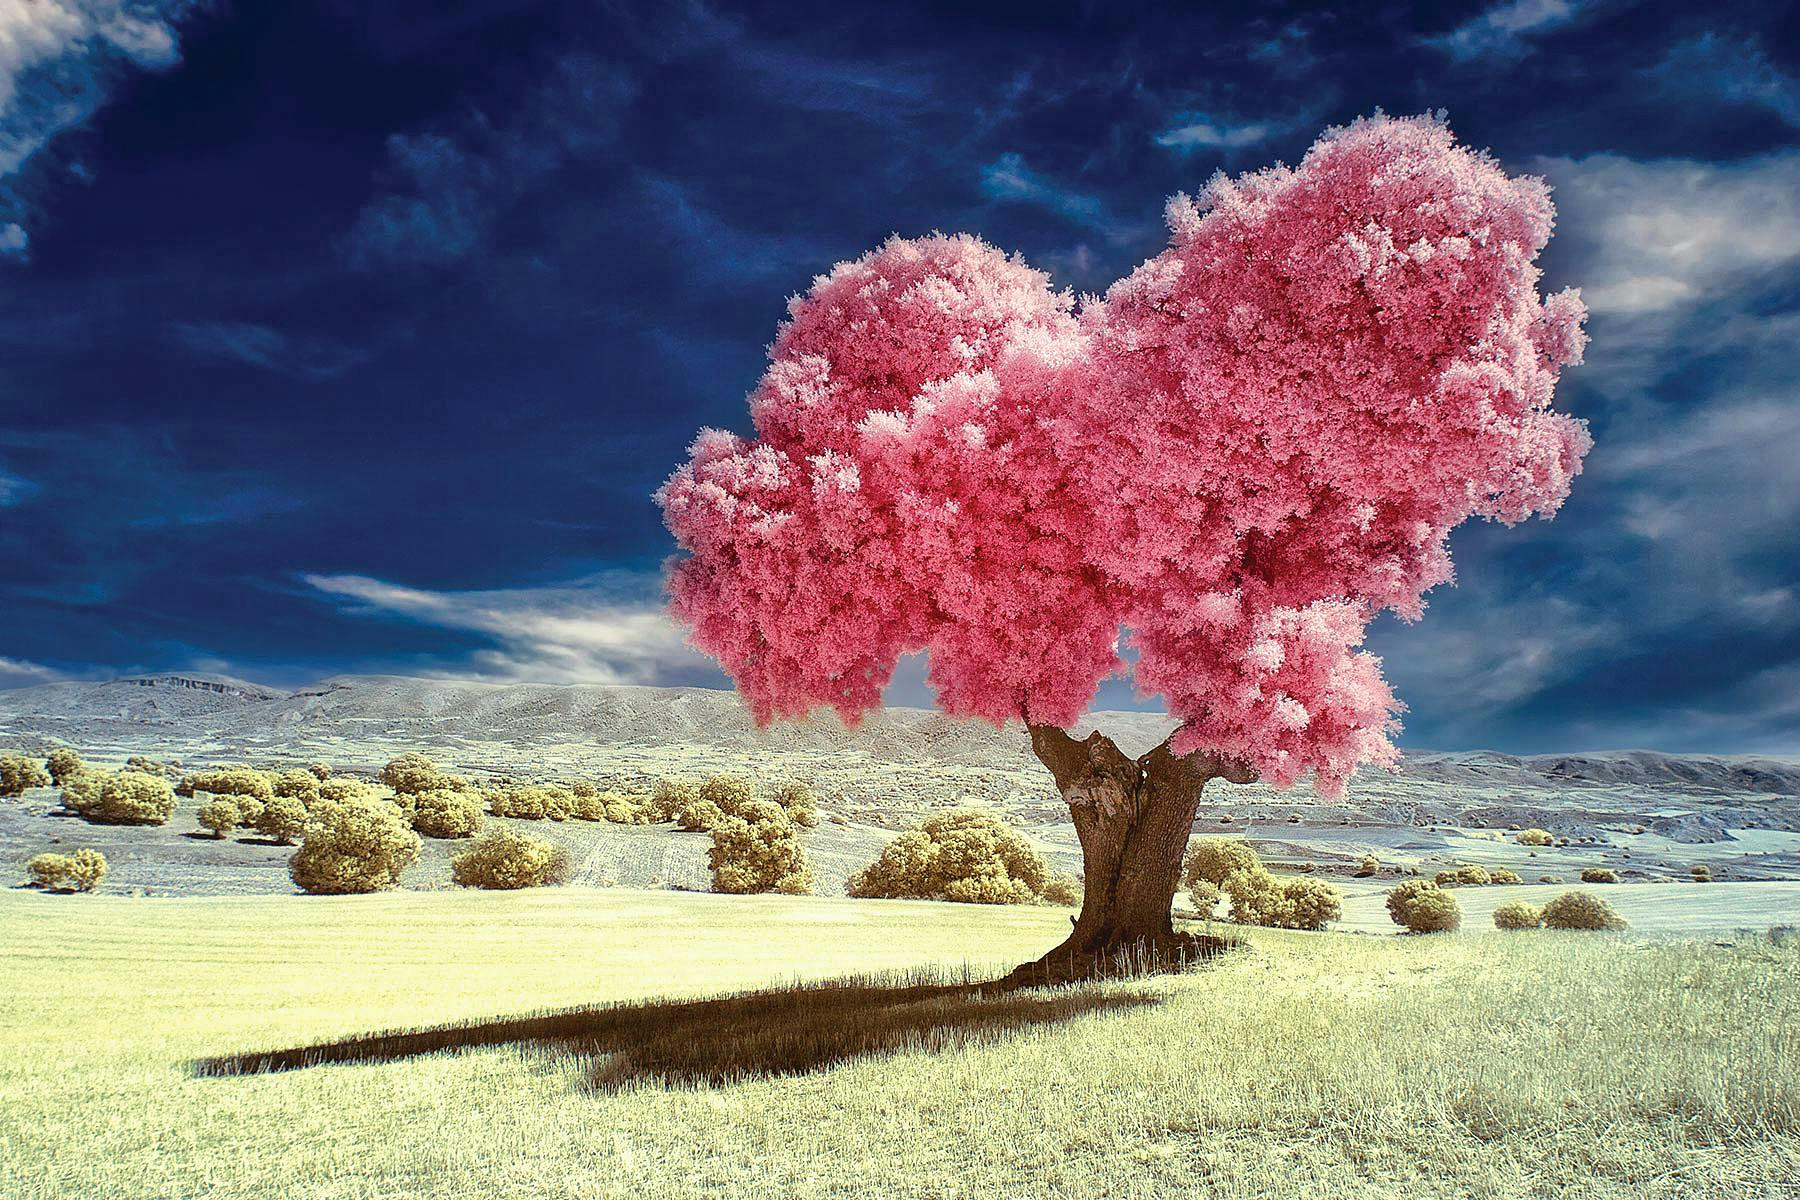 "beauty in nature day landscape nature no people non-urban scene outdoors remote cloud sky solitude tranquil scene tranquility tree pink cuenca spain" plant flower blossom